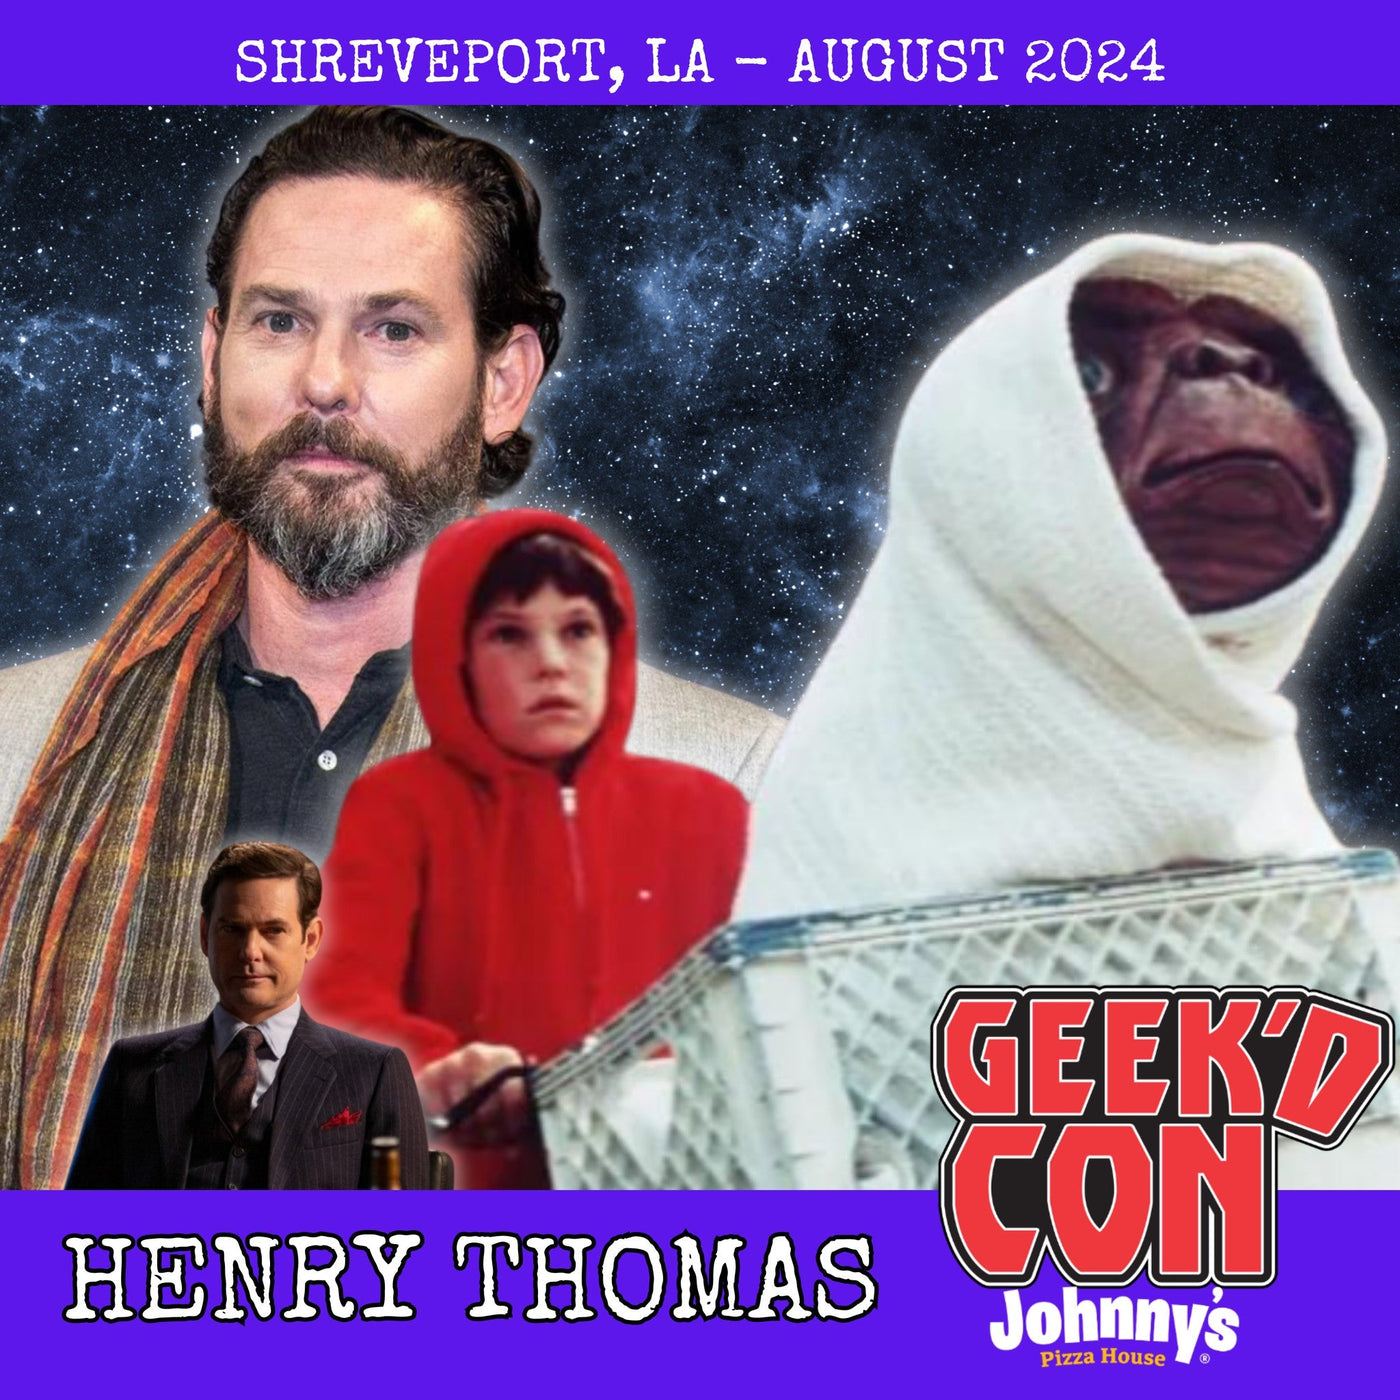 Henry Thomas Official Autograph Mail-In Service - Geek'd Con 2024